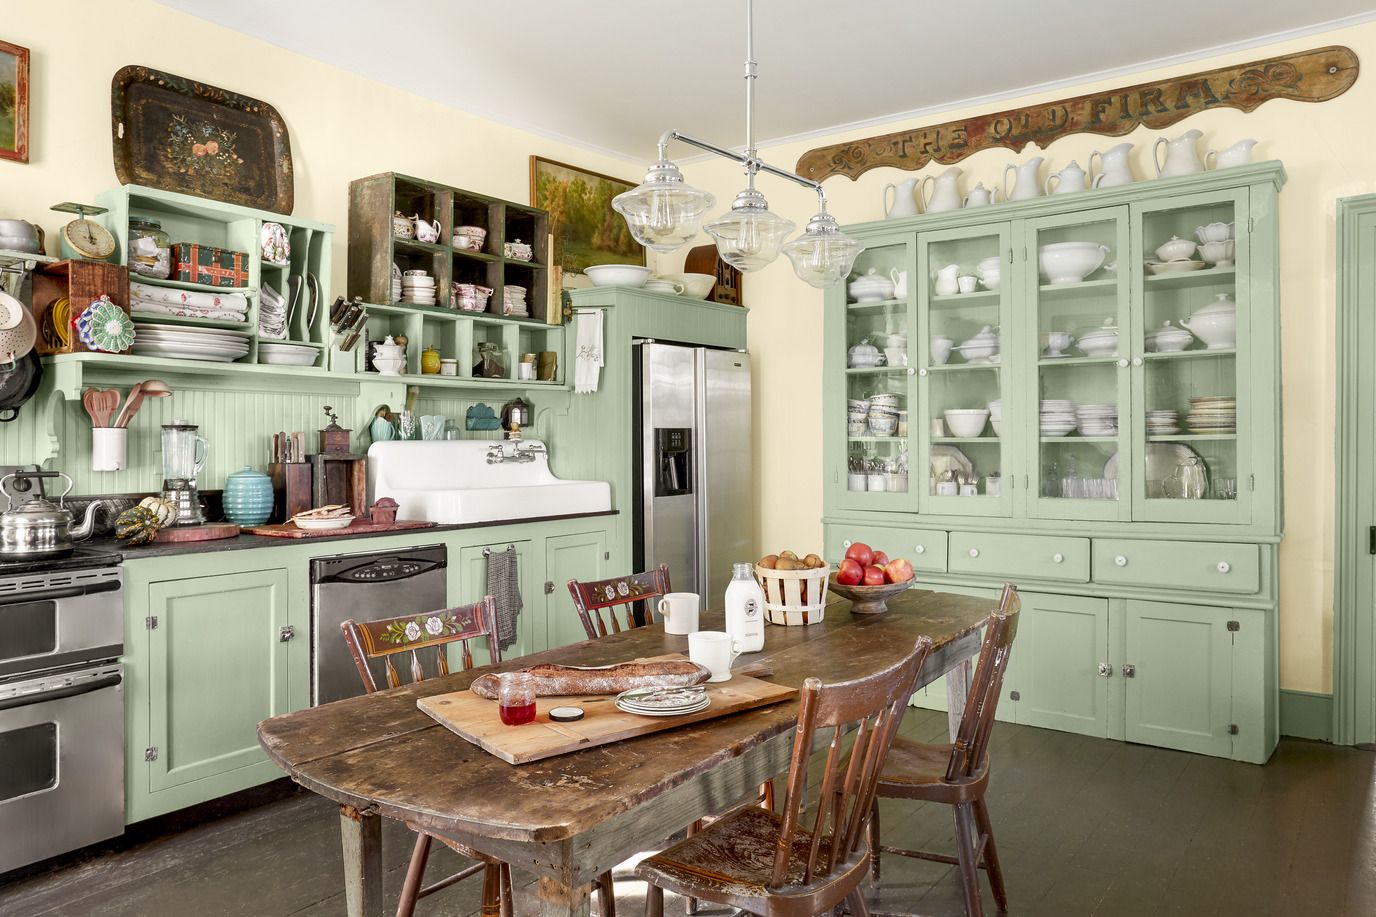 A Sage Green Kitchen Sets Up a Country Vibe